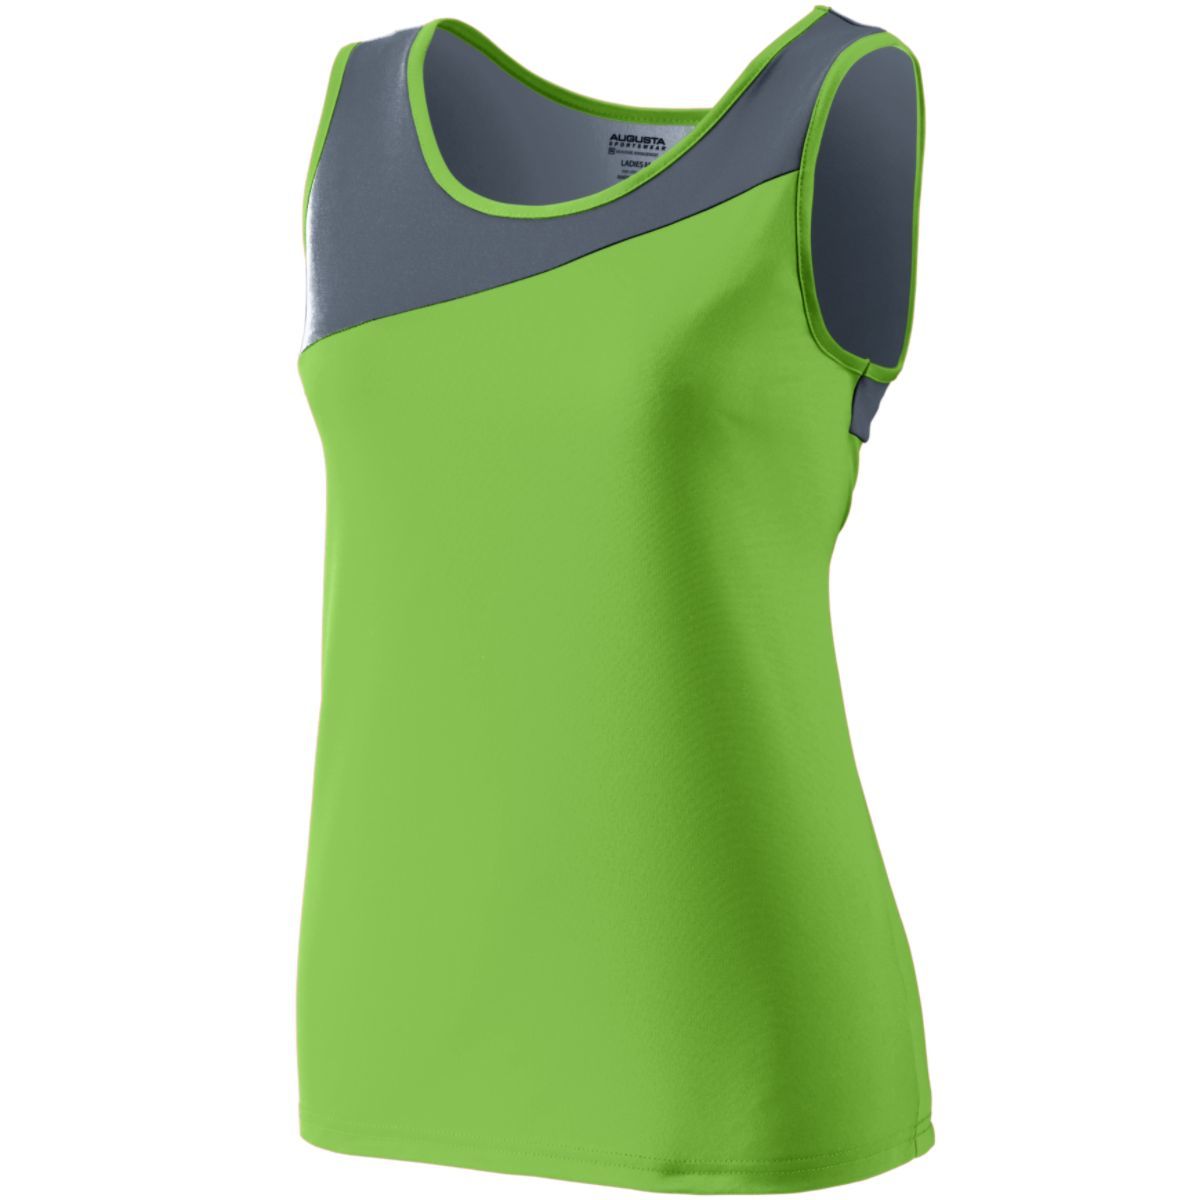 Augusta Sportswear Ladies Accelerate Jersey in Lime/Graphite  -Part of the Ladies, Ladies-Jersey, Augusta-Products, Track-Field, Shirts product lines at KanaleyCreations.com